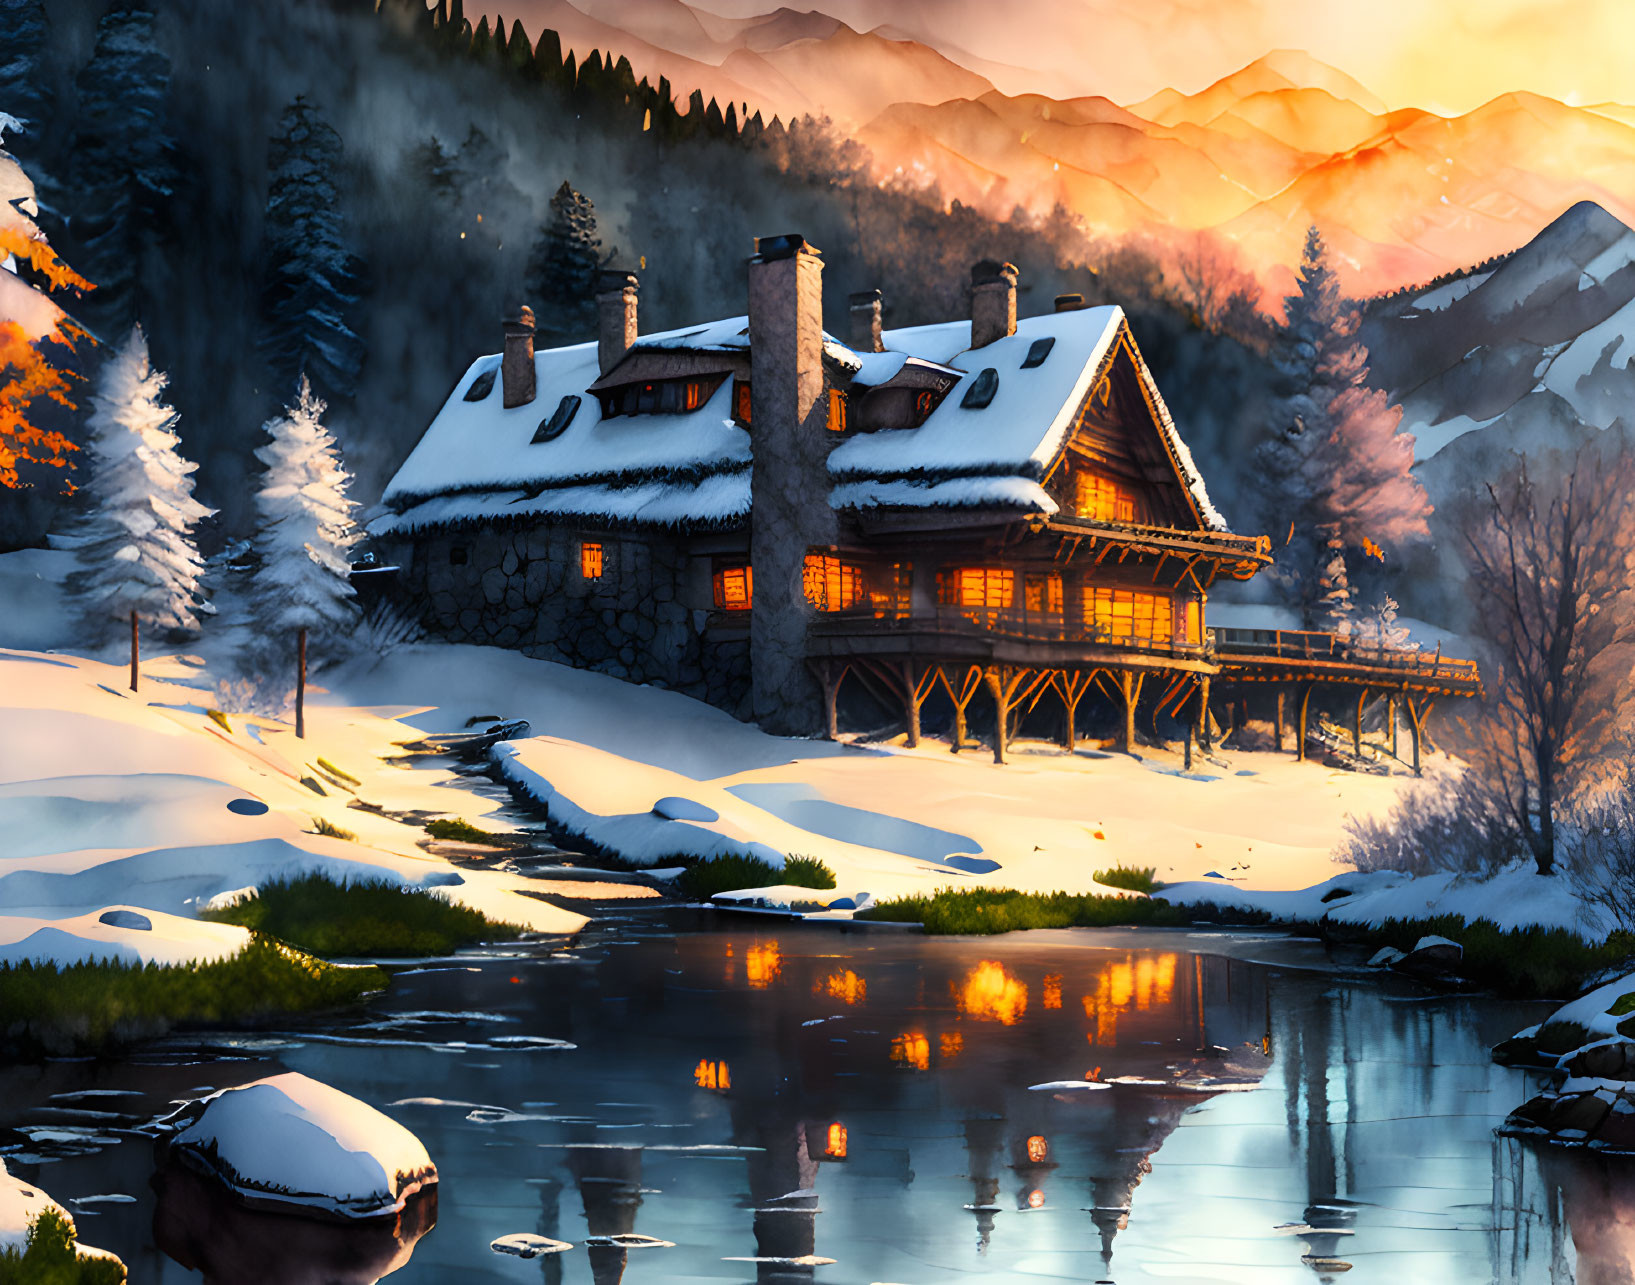 Snow-covered cabin in winter landscape near river at sunset